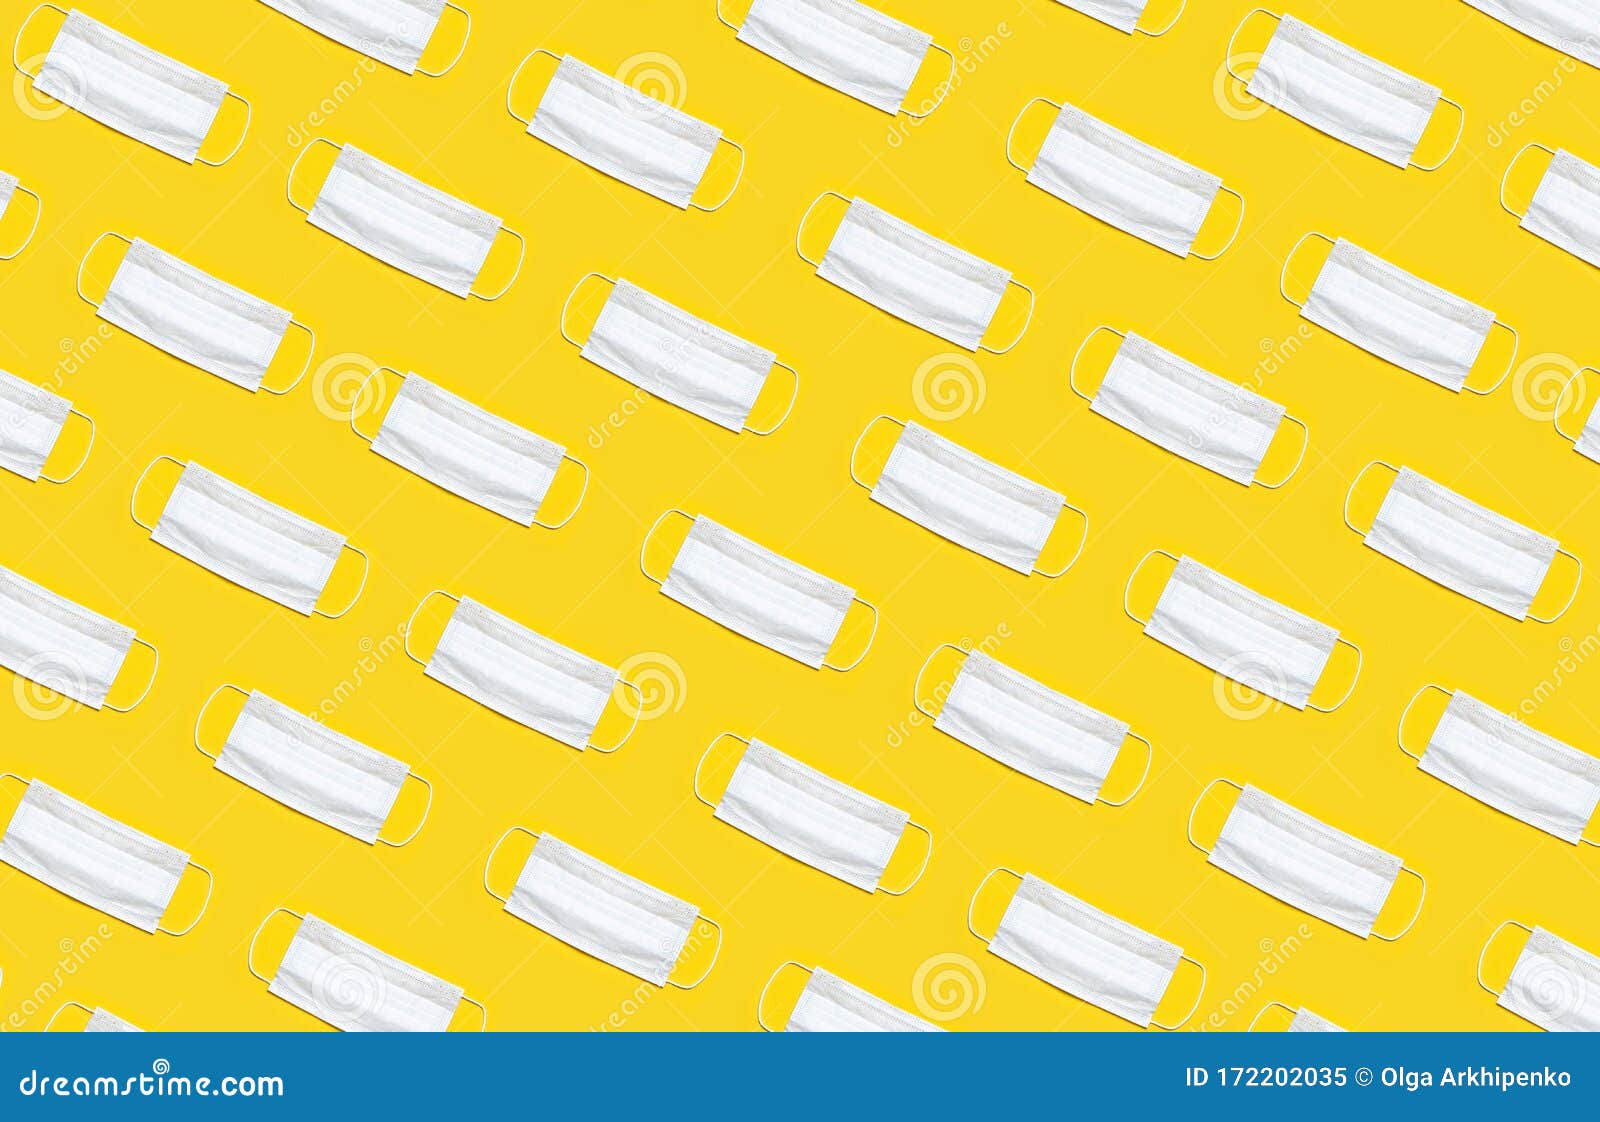 Download Pattern Of Medical Mask On Yellow Background Flat Lay Top View With Copy Space Protection Against Virus Coronavirus Flu Colds Stock Image Image Of Pandemic Object 172202035 PSD Mockup Templates